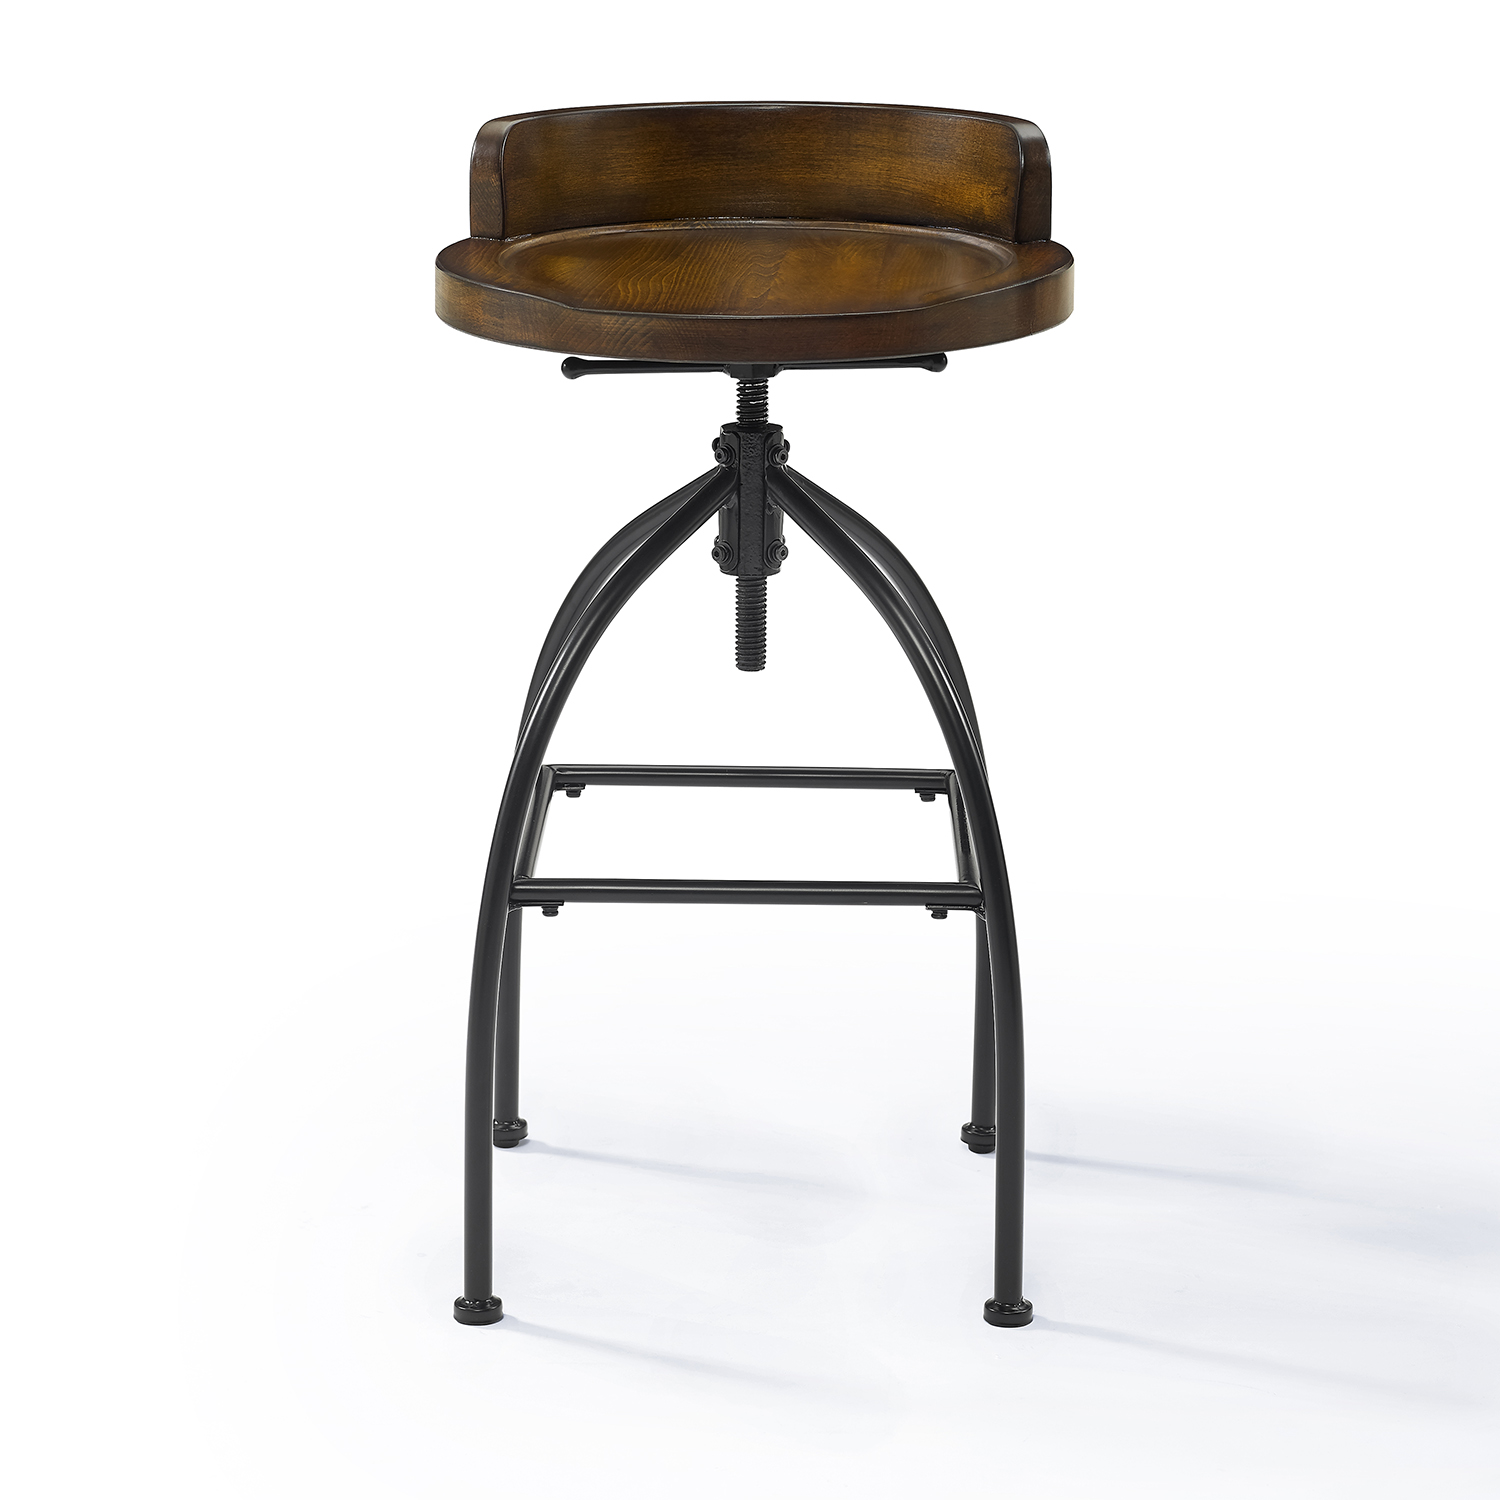 Bar Counter Stools Adjustable, Counter Height Leather Stools